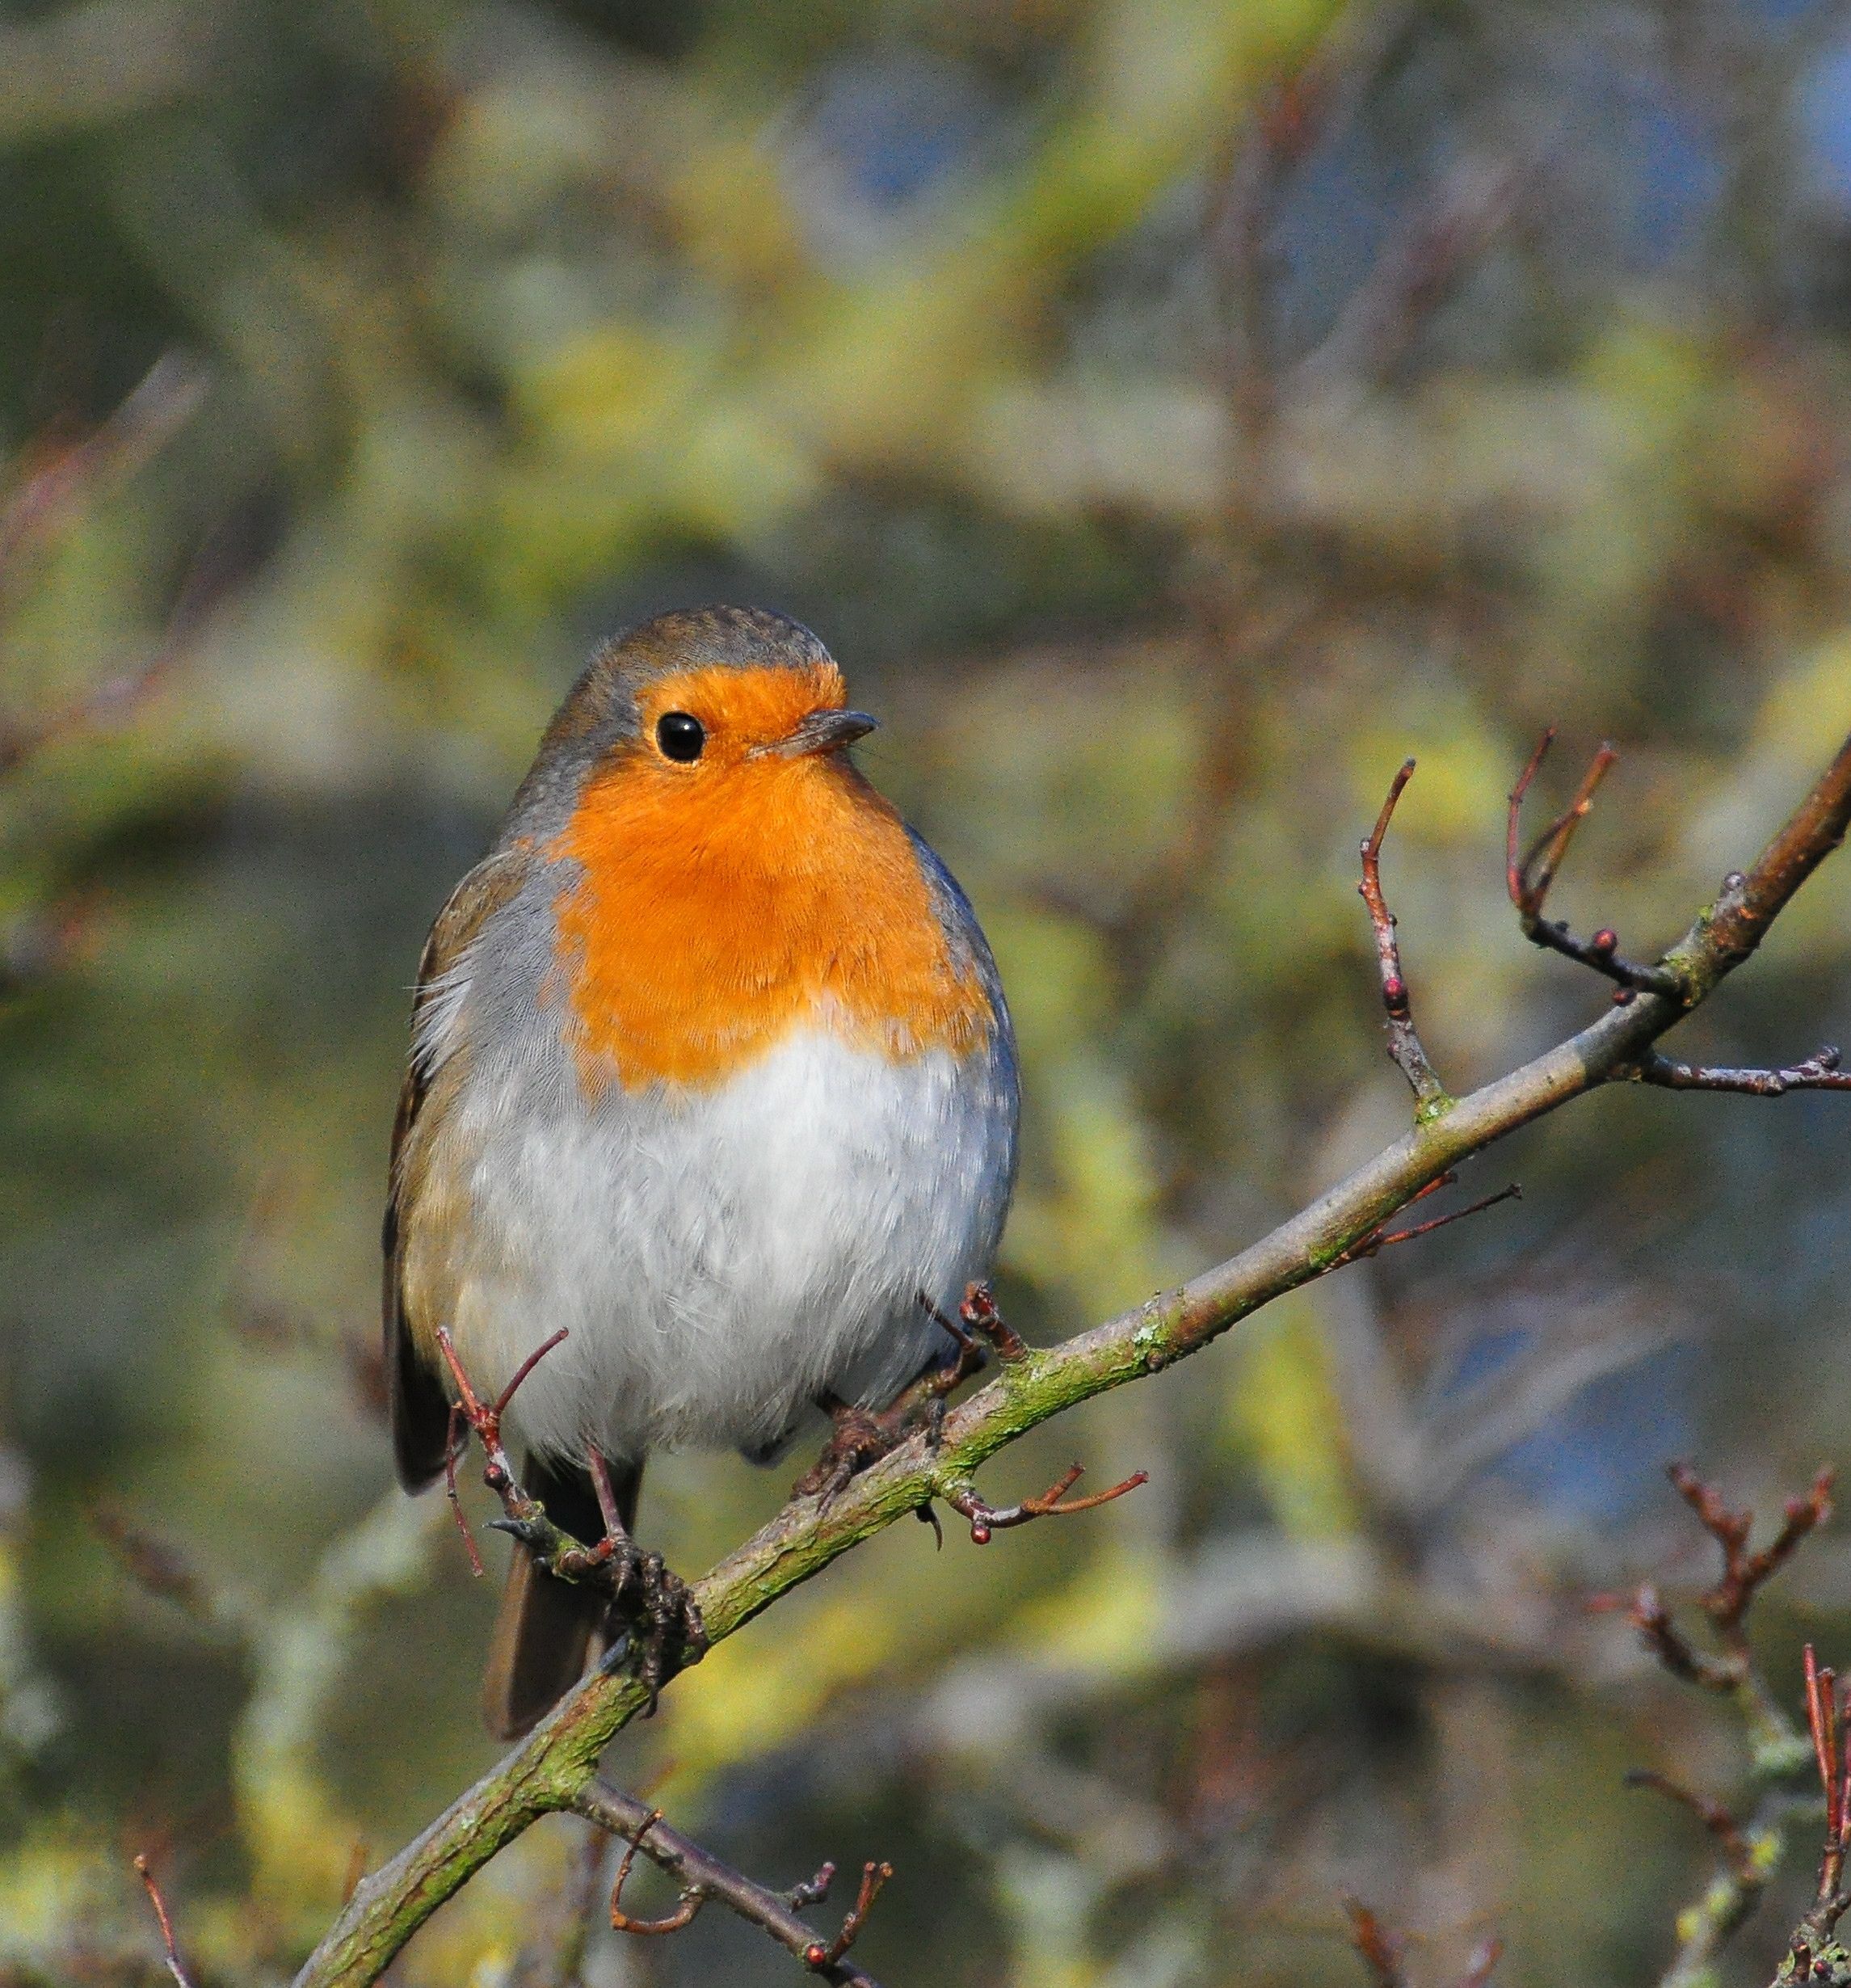 Cute Robin | Soaring with ACDSee Photo Contest Entrants | Pinterest ...